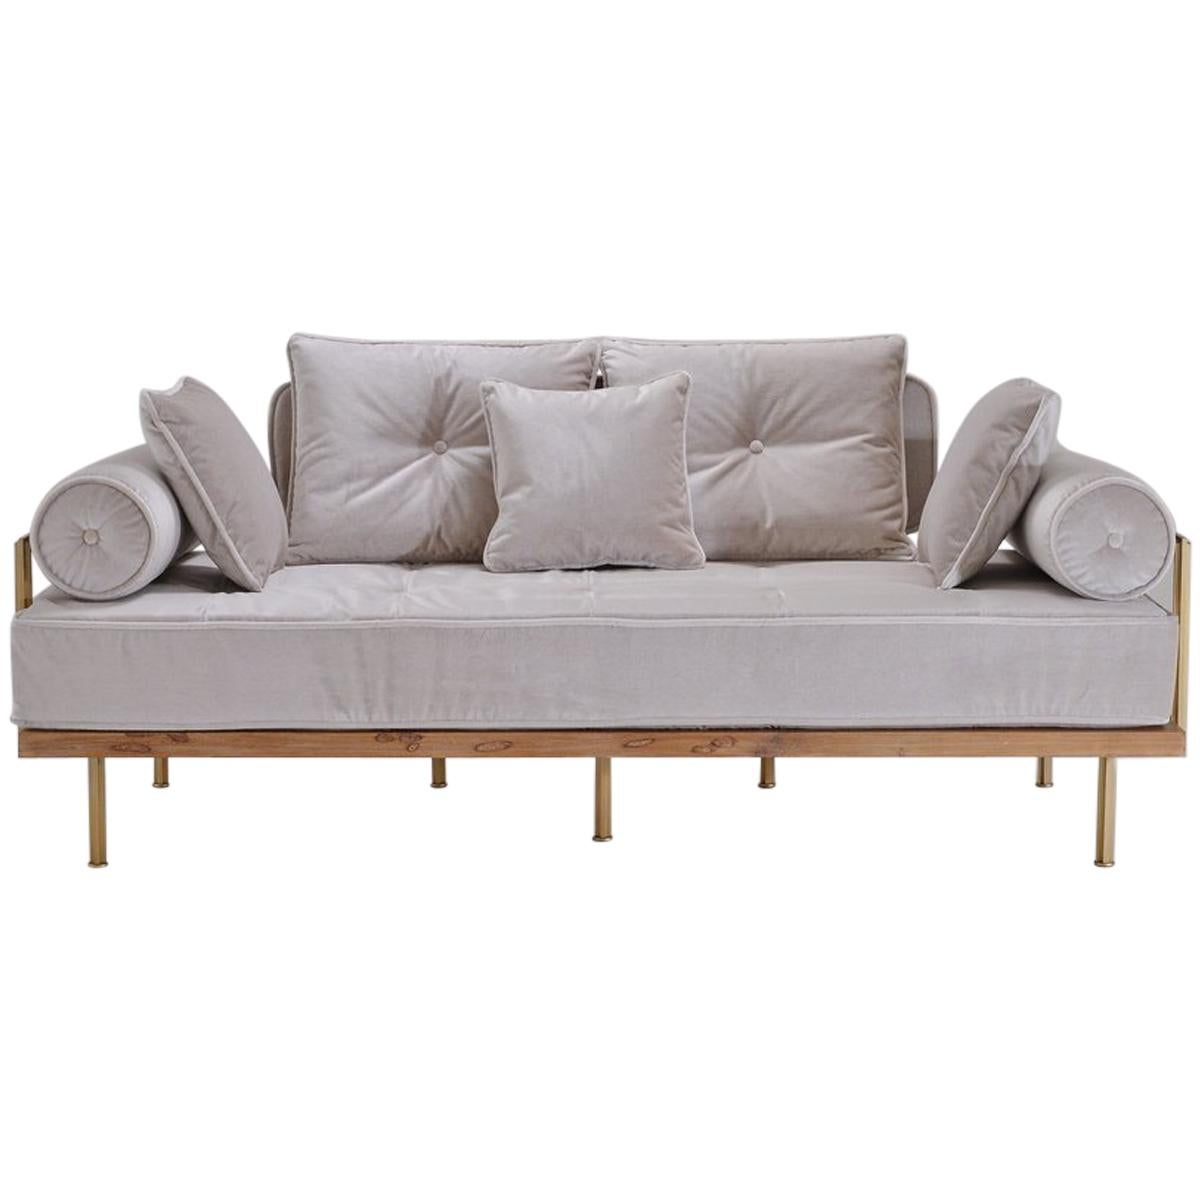 Bespoke Two-Seat Sofa with Brass and Bleached Hardwood Frame by P. Tendercool For Sale